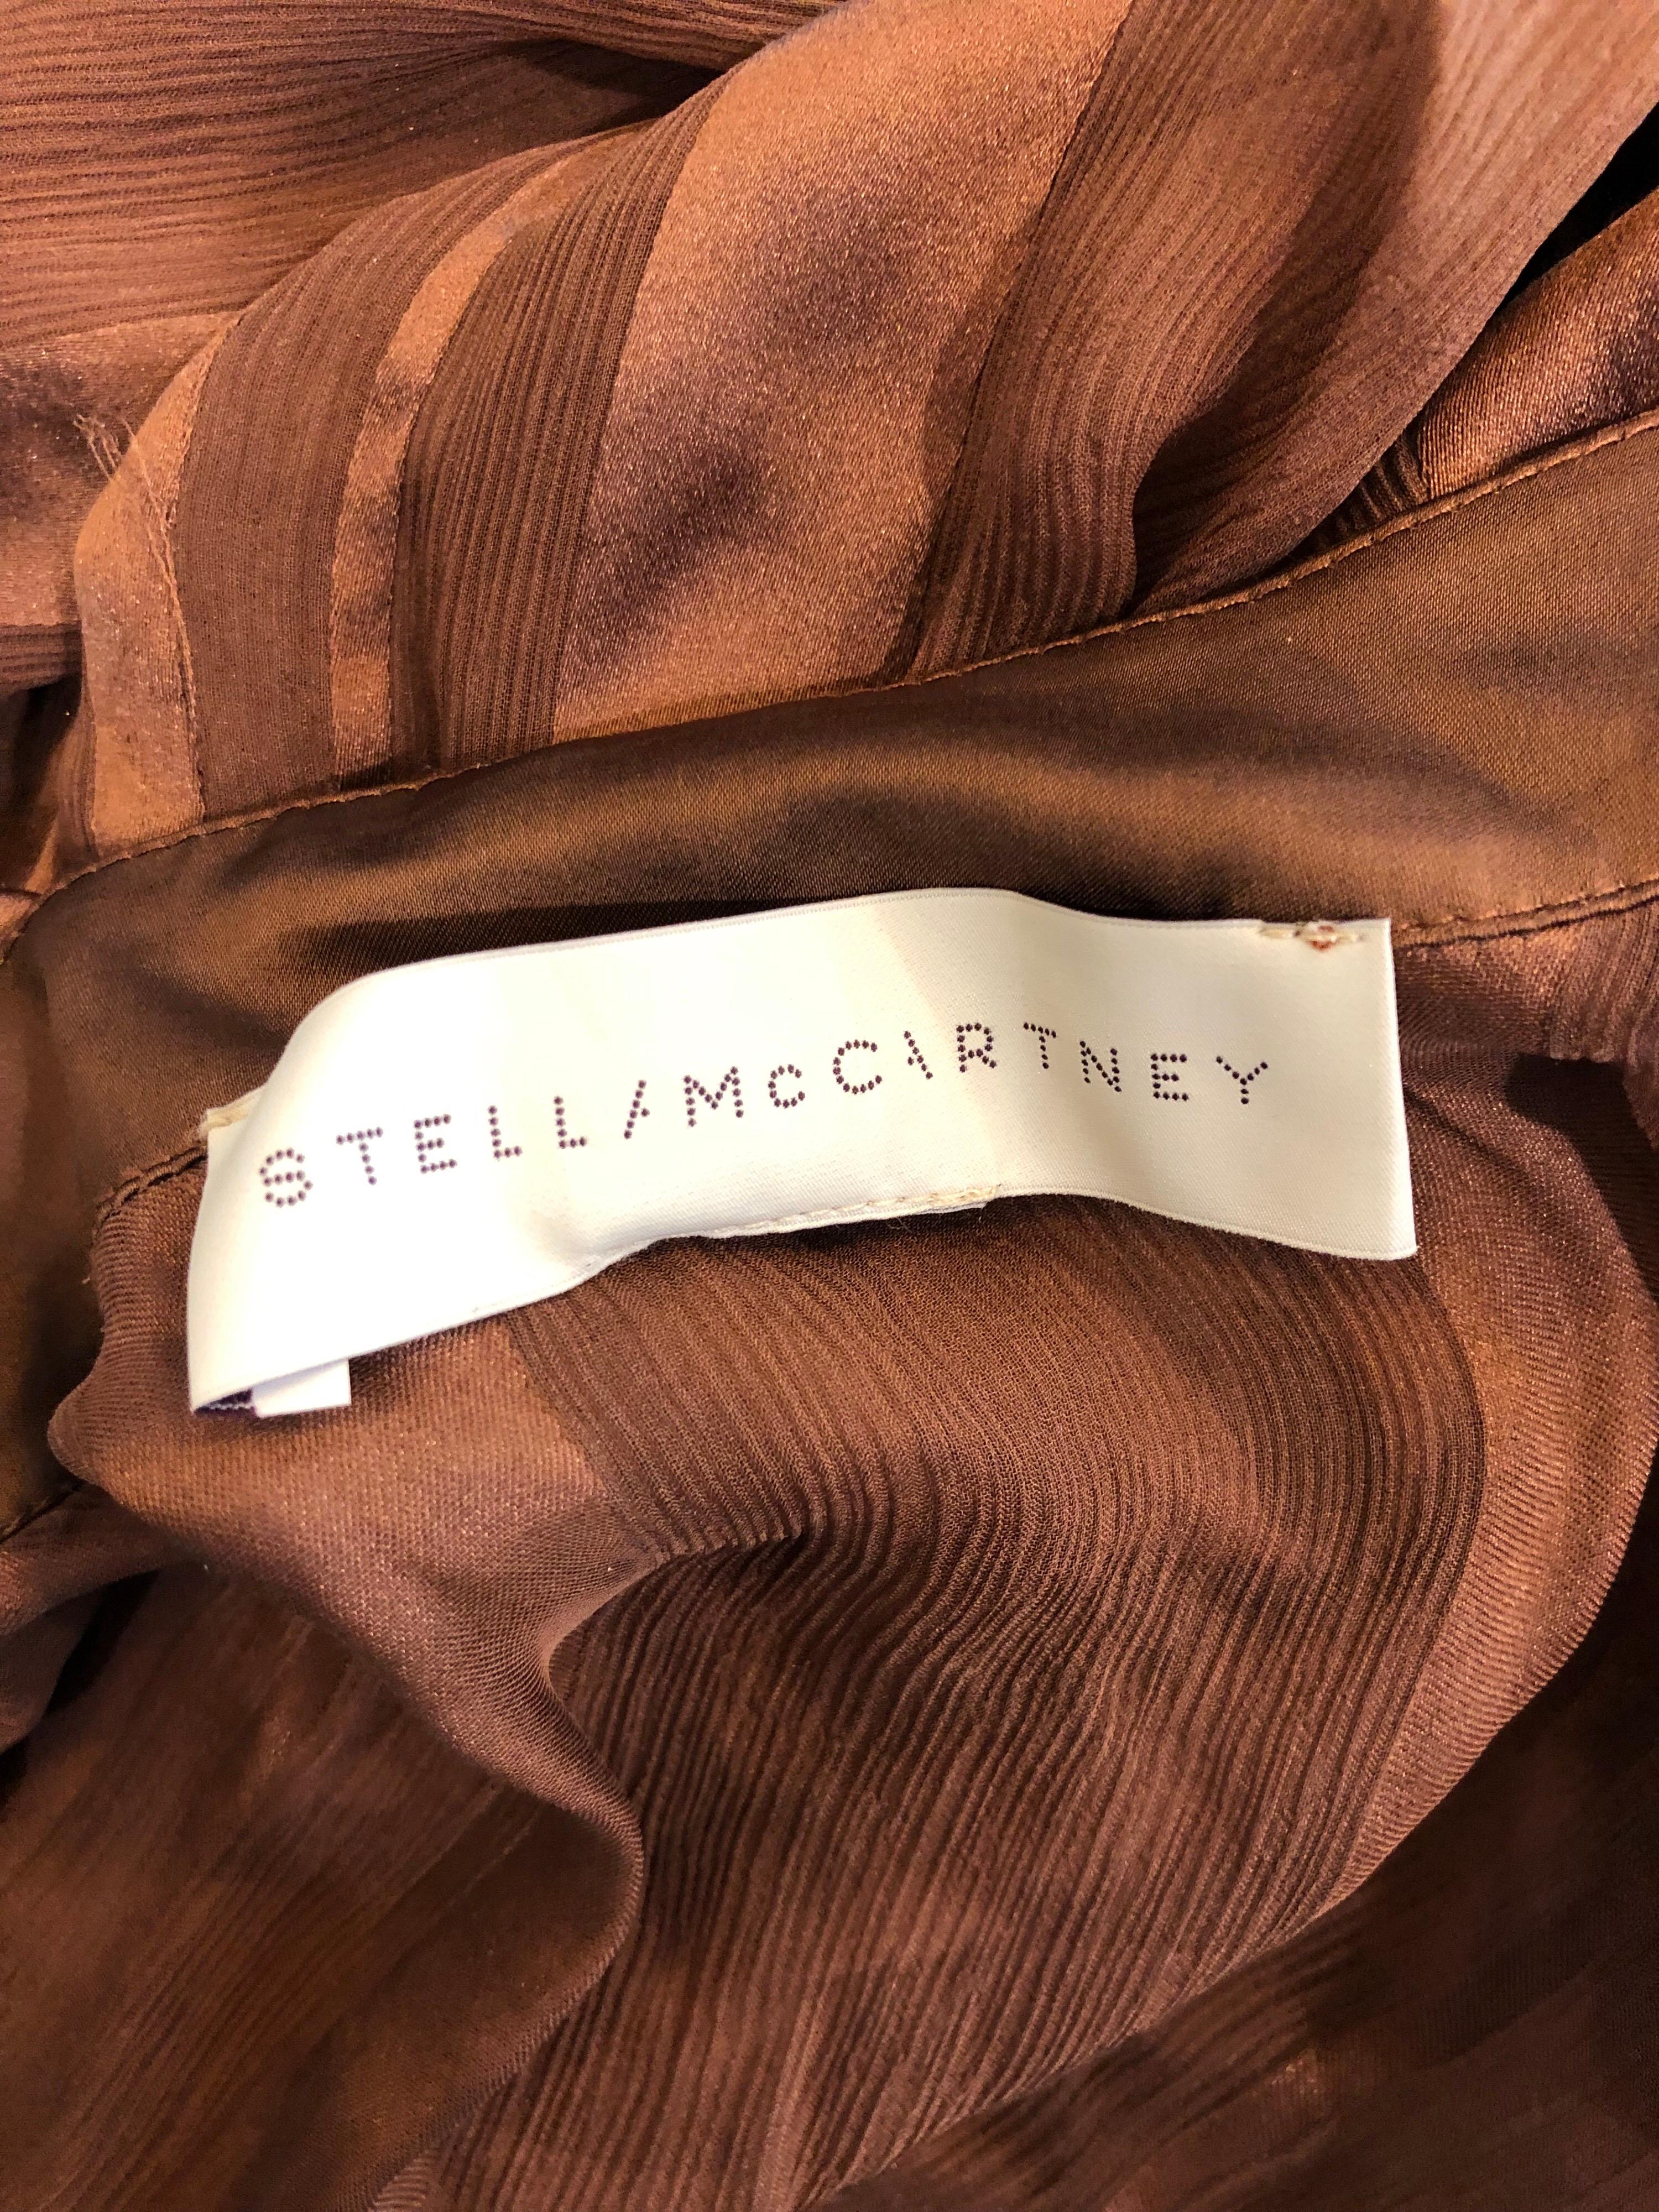 Undeniably chic STELLA MCCARTNEY rust brown colored silk chiffon semi sheer long sleeve blouse! A unique and stylish take on a typical blouse. Perfect color matches anything, and is a great pop against black trousers / skirt. Buttons up the upper